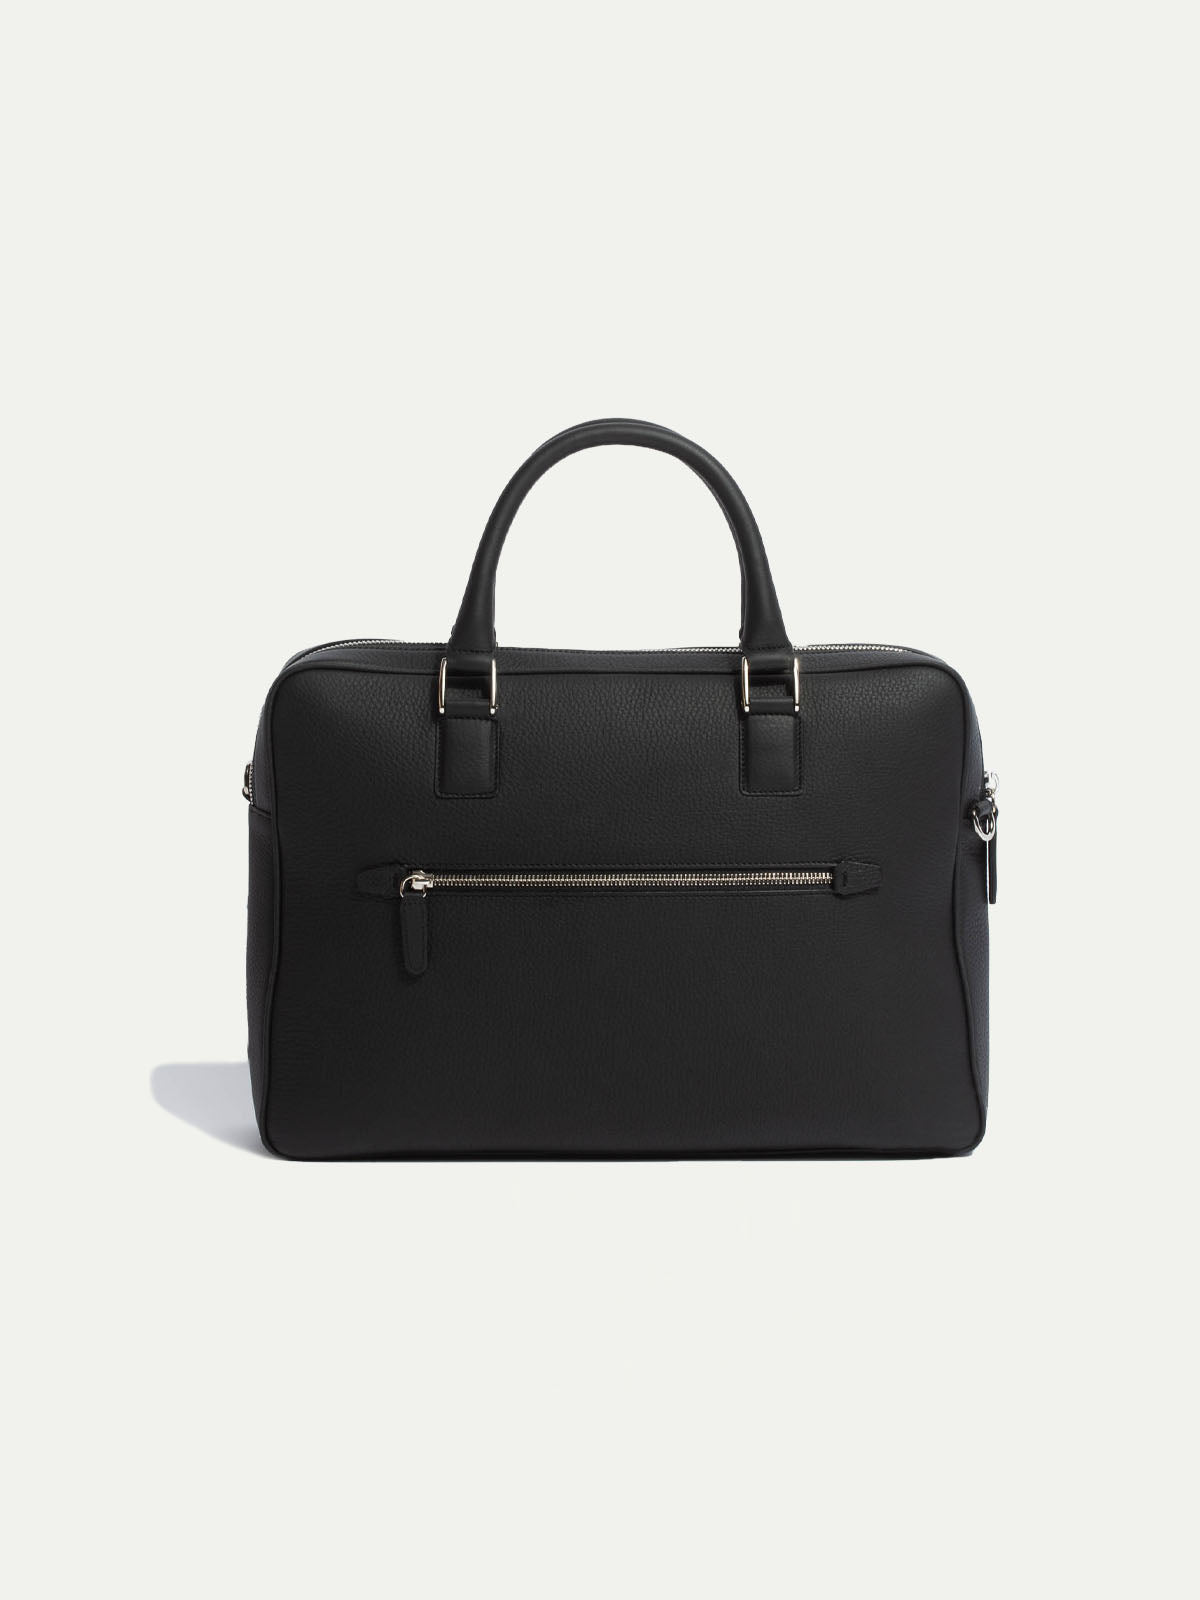 Black leather briefcase - Made in Italy